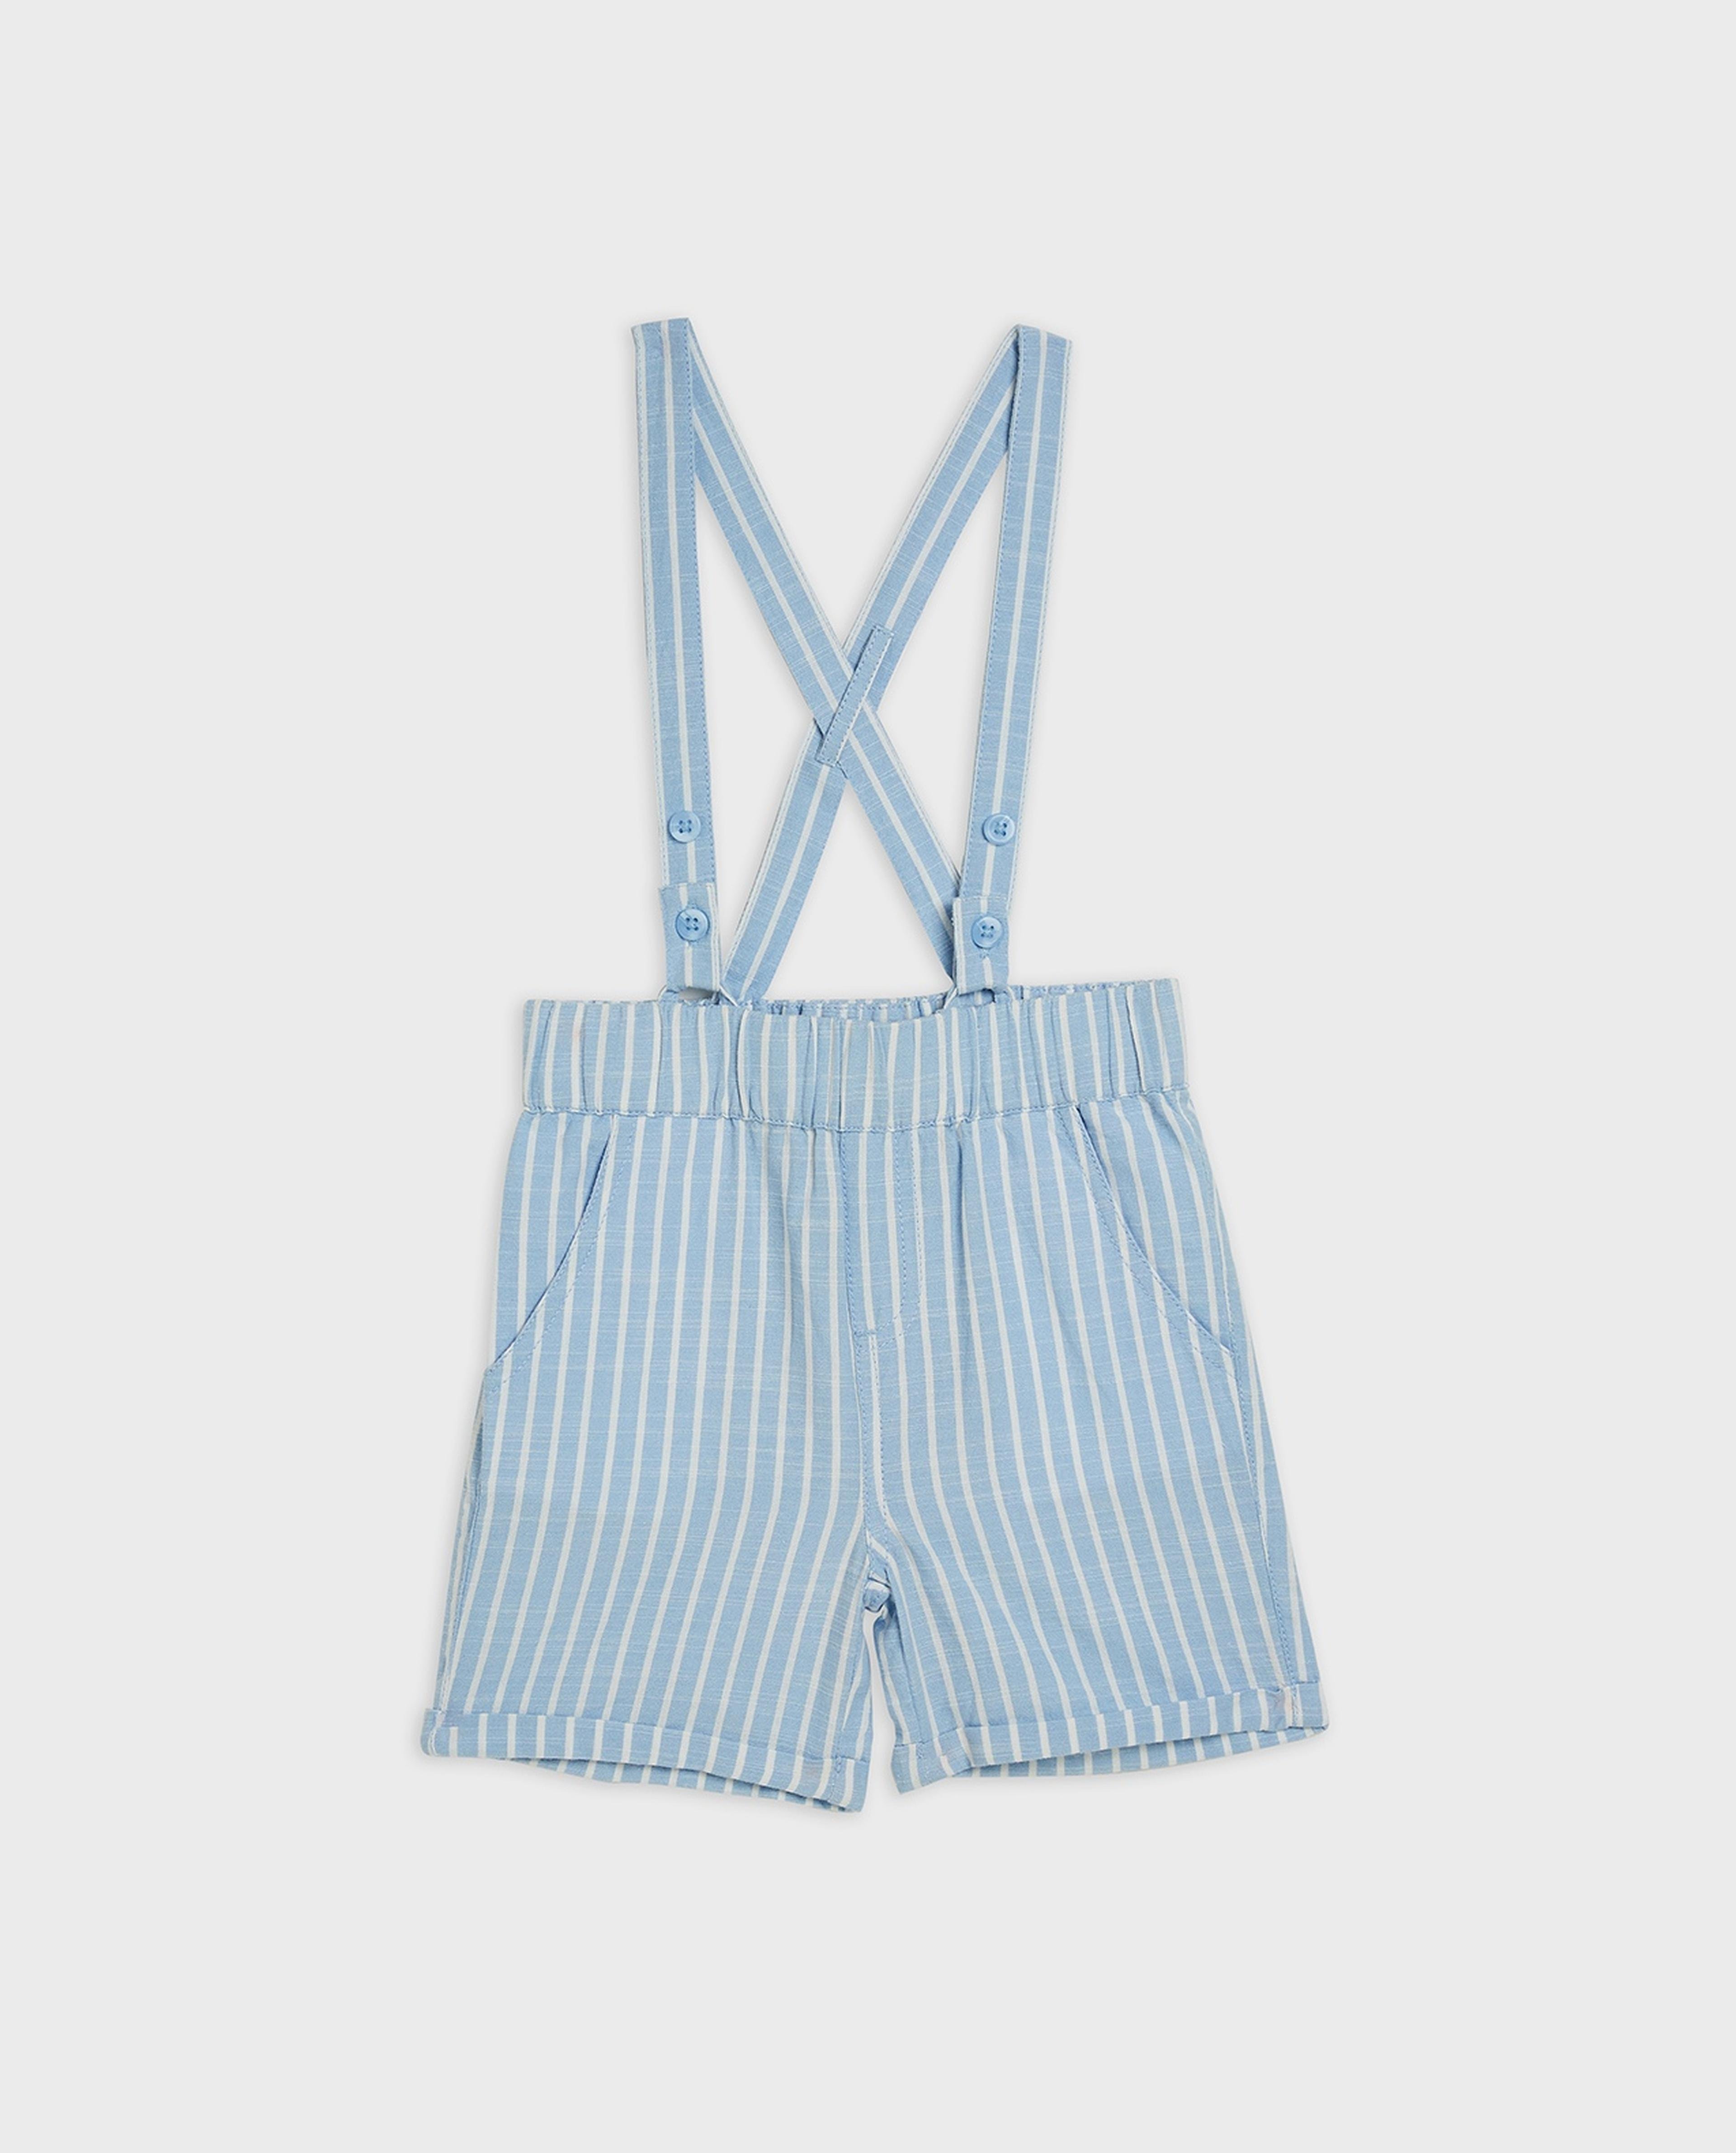 Solid Shirt and Striped Shorts with Suspenders